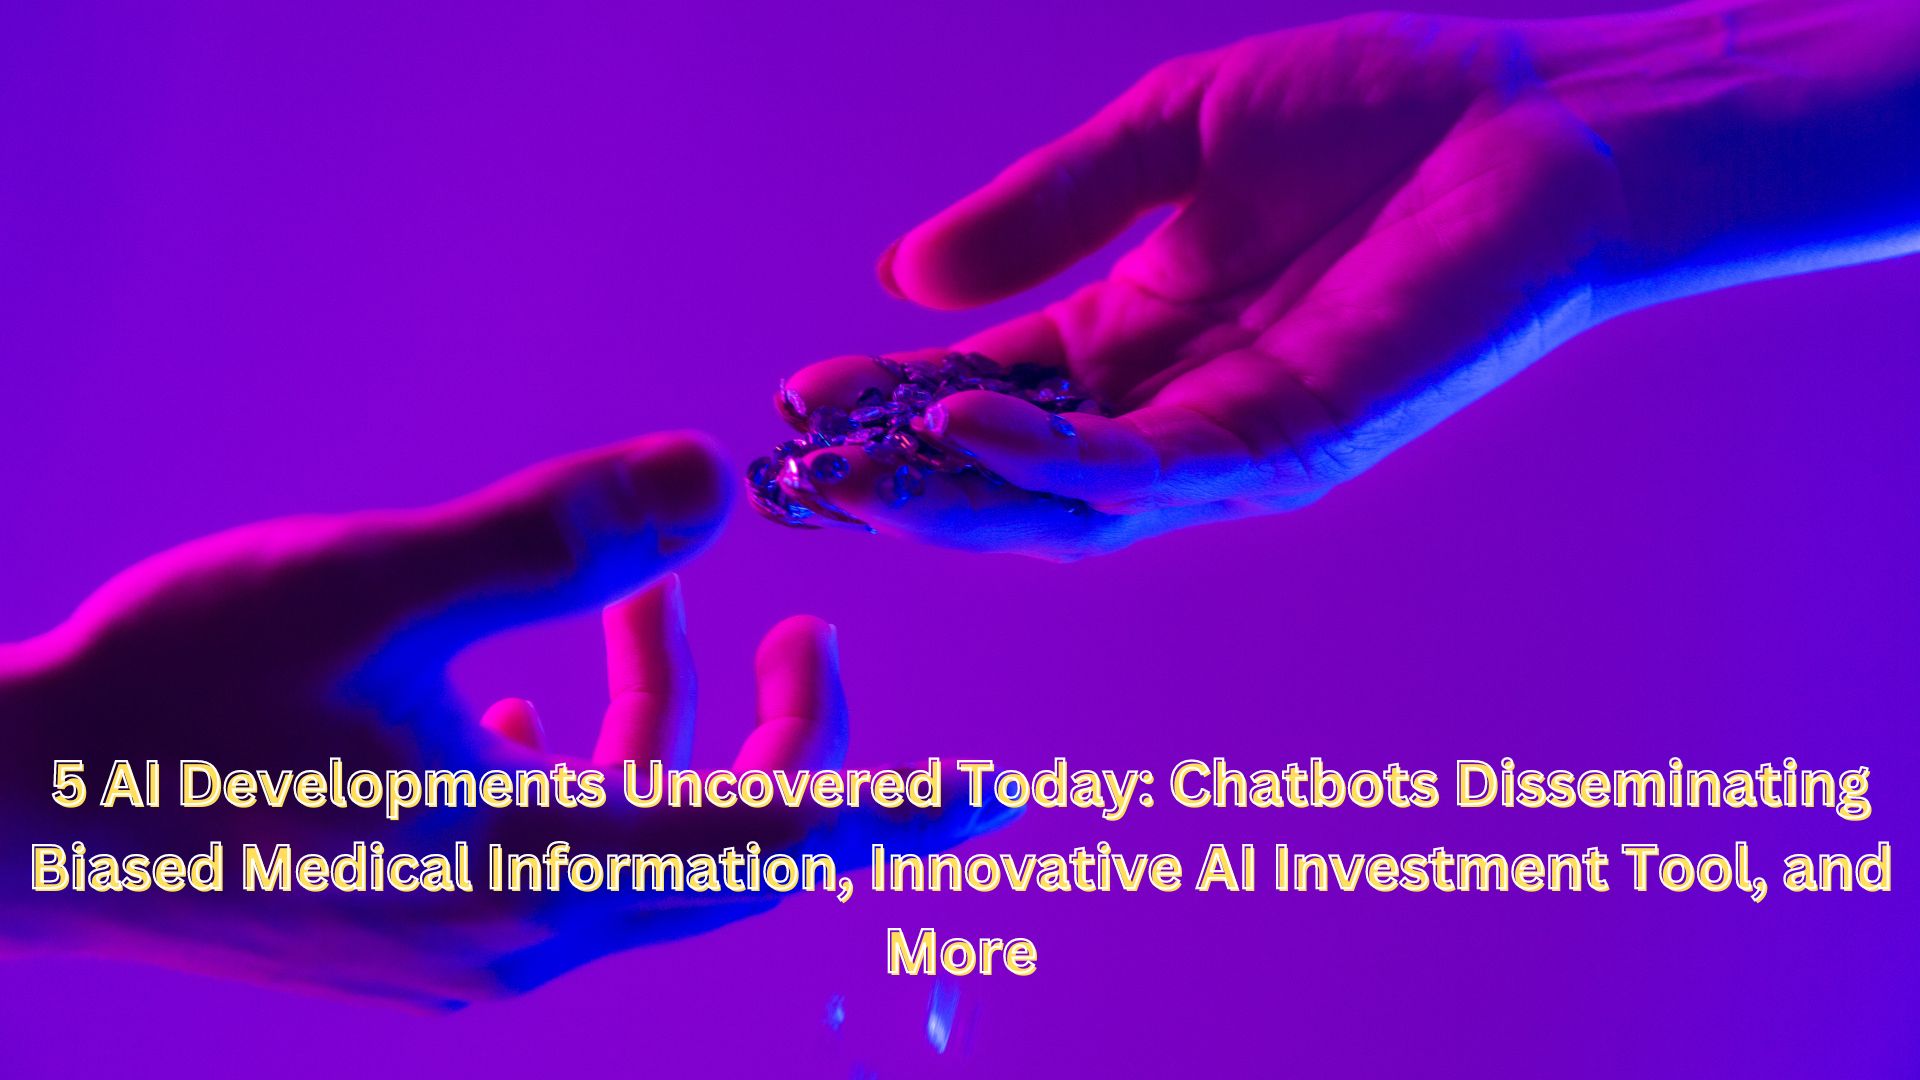 5 AI Developments Uncovered Today: Chatbots Disseminating Biased Medical Information, Innovative AI Investment Tool, and More